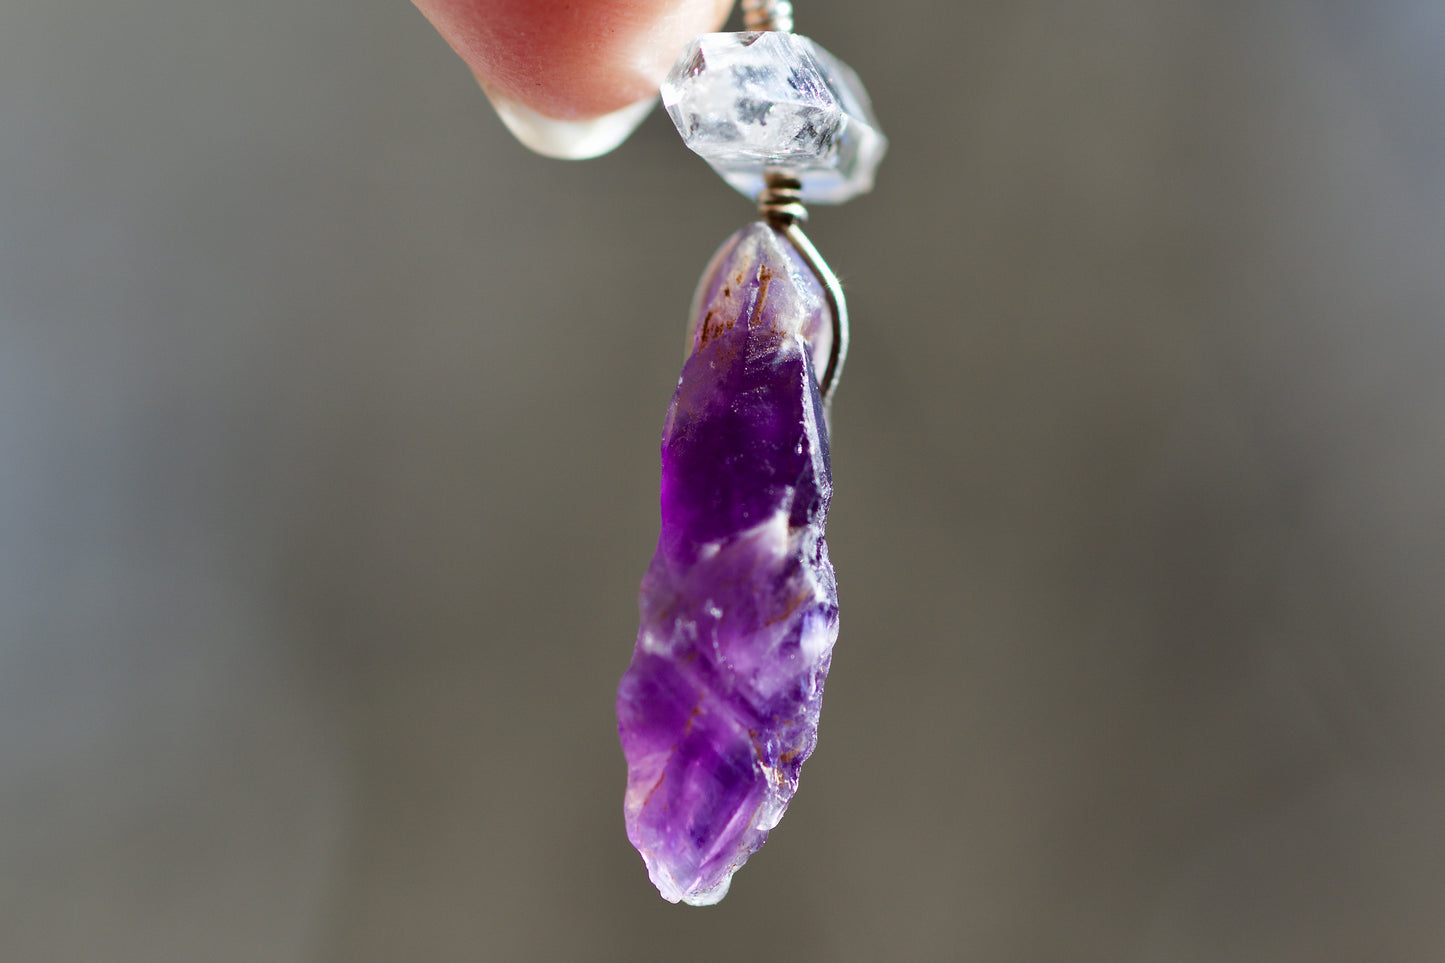 Double Termination Tibetan Clear Quartz Crystal with Black Mineral Inclusions, Raw Amethyst, and Sterling Silver Pendant Necklace